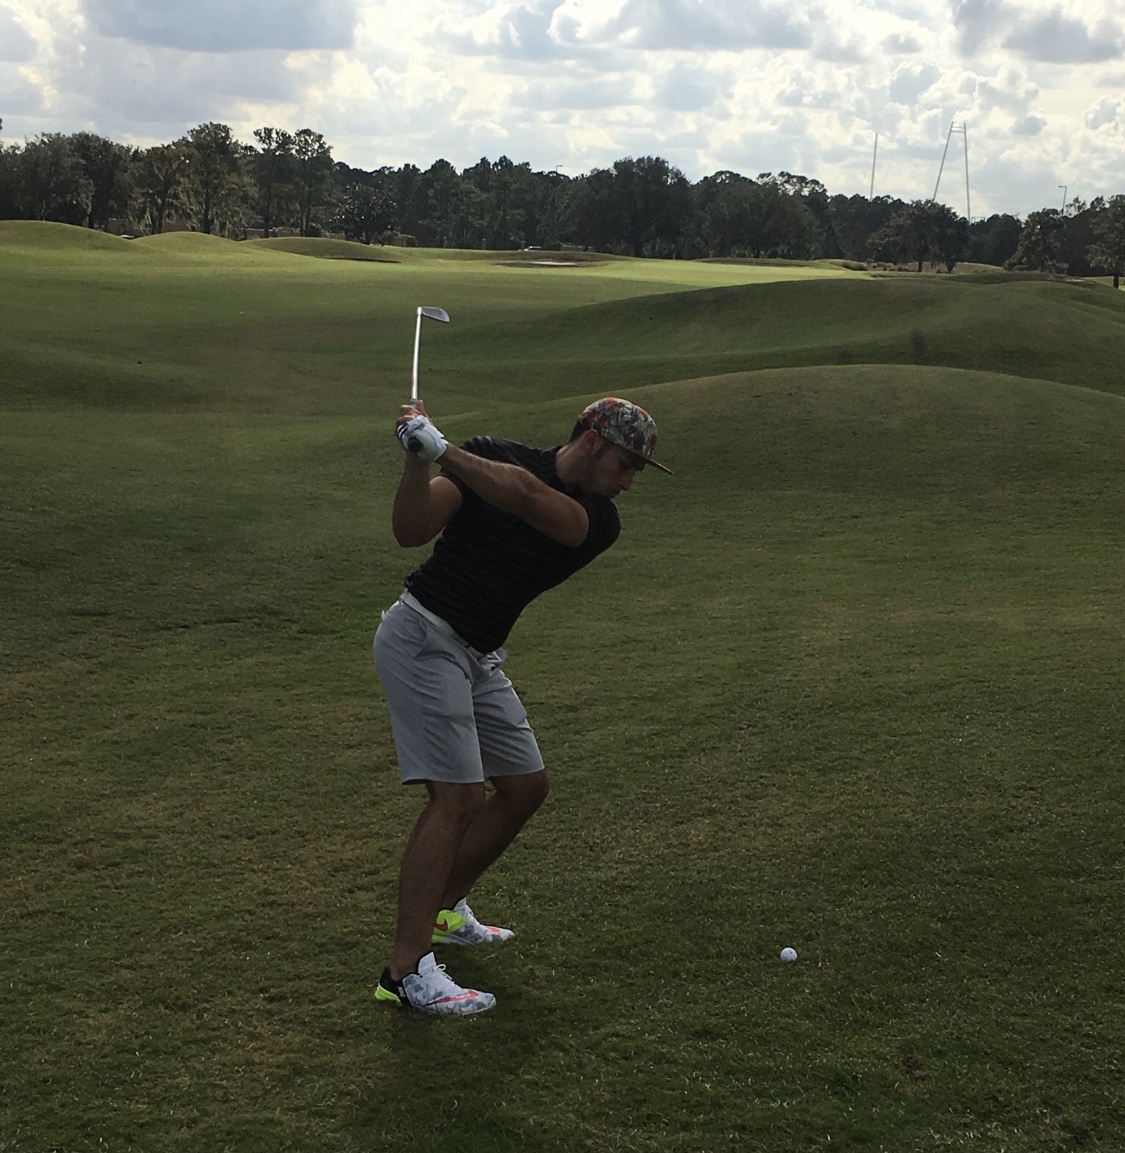 Surprised? USFSP has a club golf team – The Crow's Nest